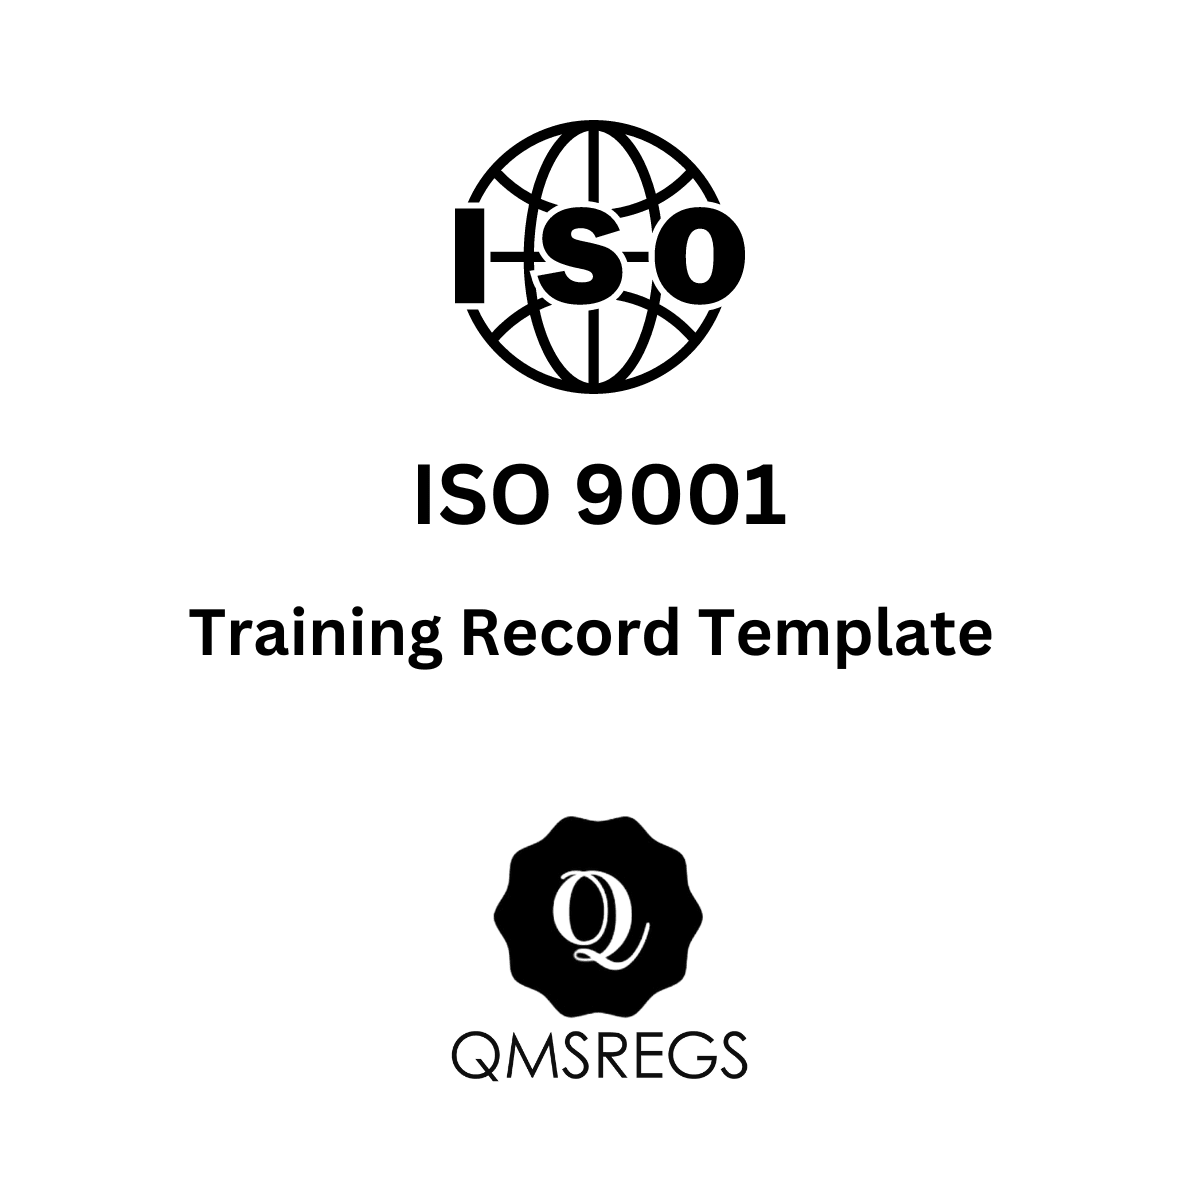 ISO 9001 Training Record Template